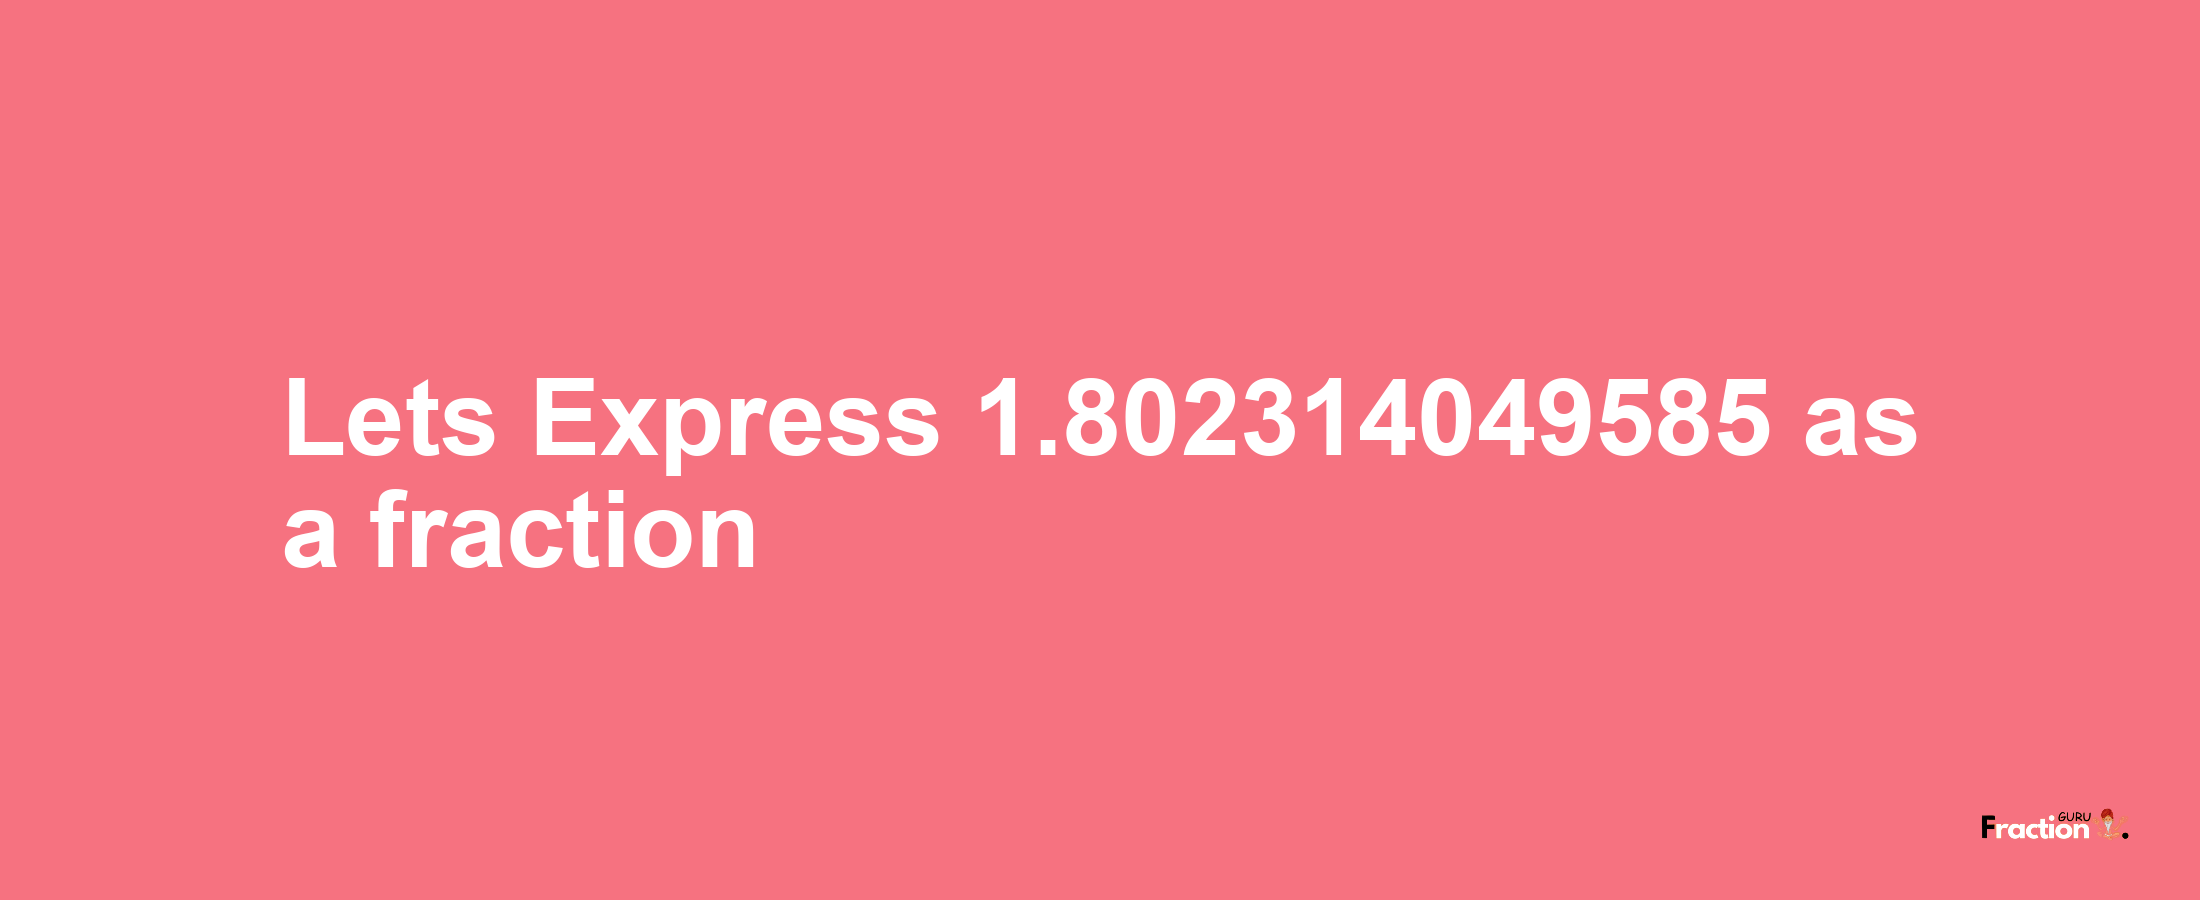 Lets Express 1.802314049585 as afraction